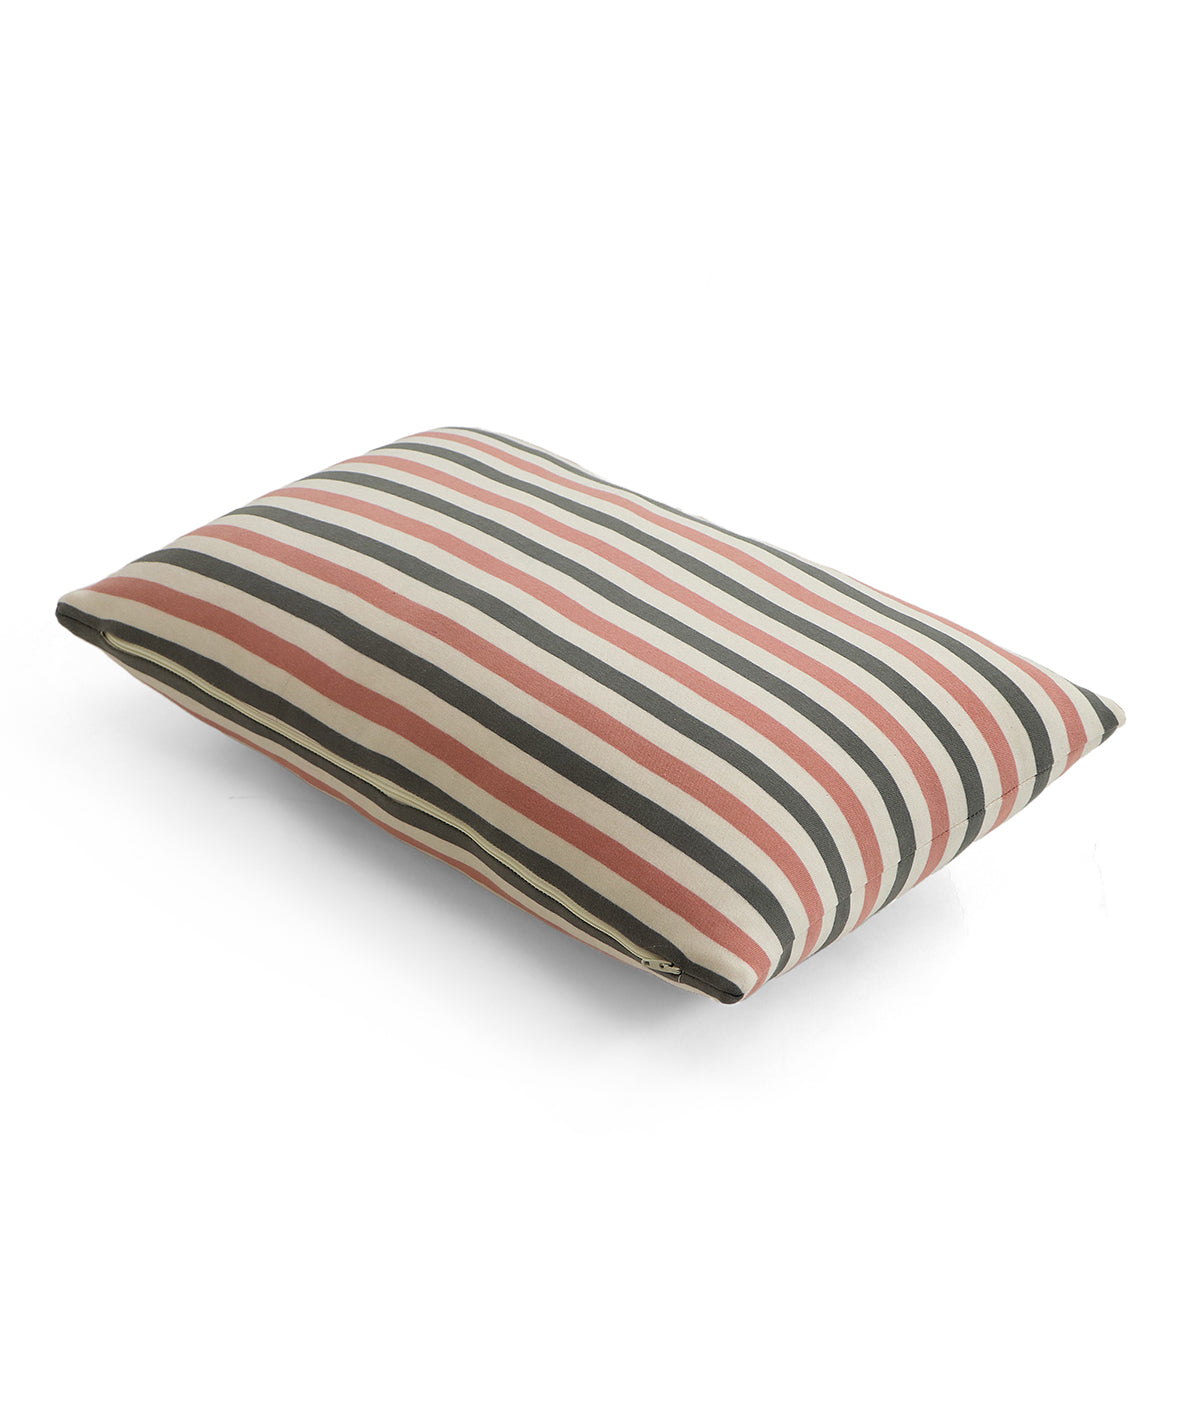 Candy Stripes Cotton Knitted Decorative Medium Grey, Natural & Blush Pink Color 12 x 20 Inches Pillow Cover